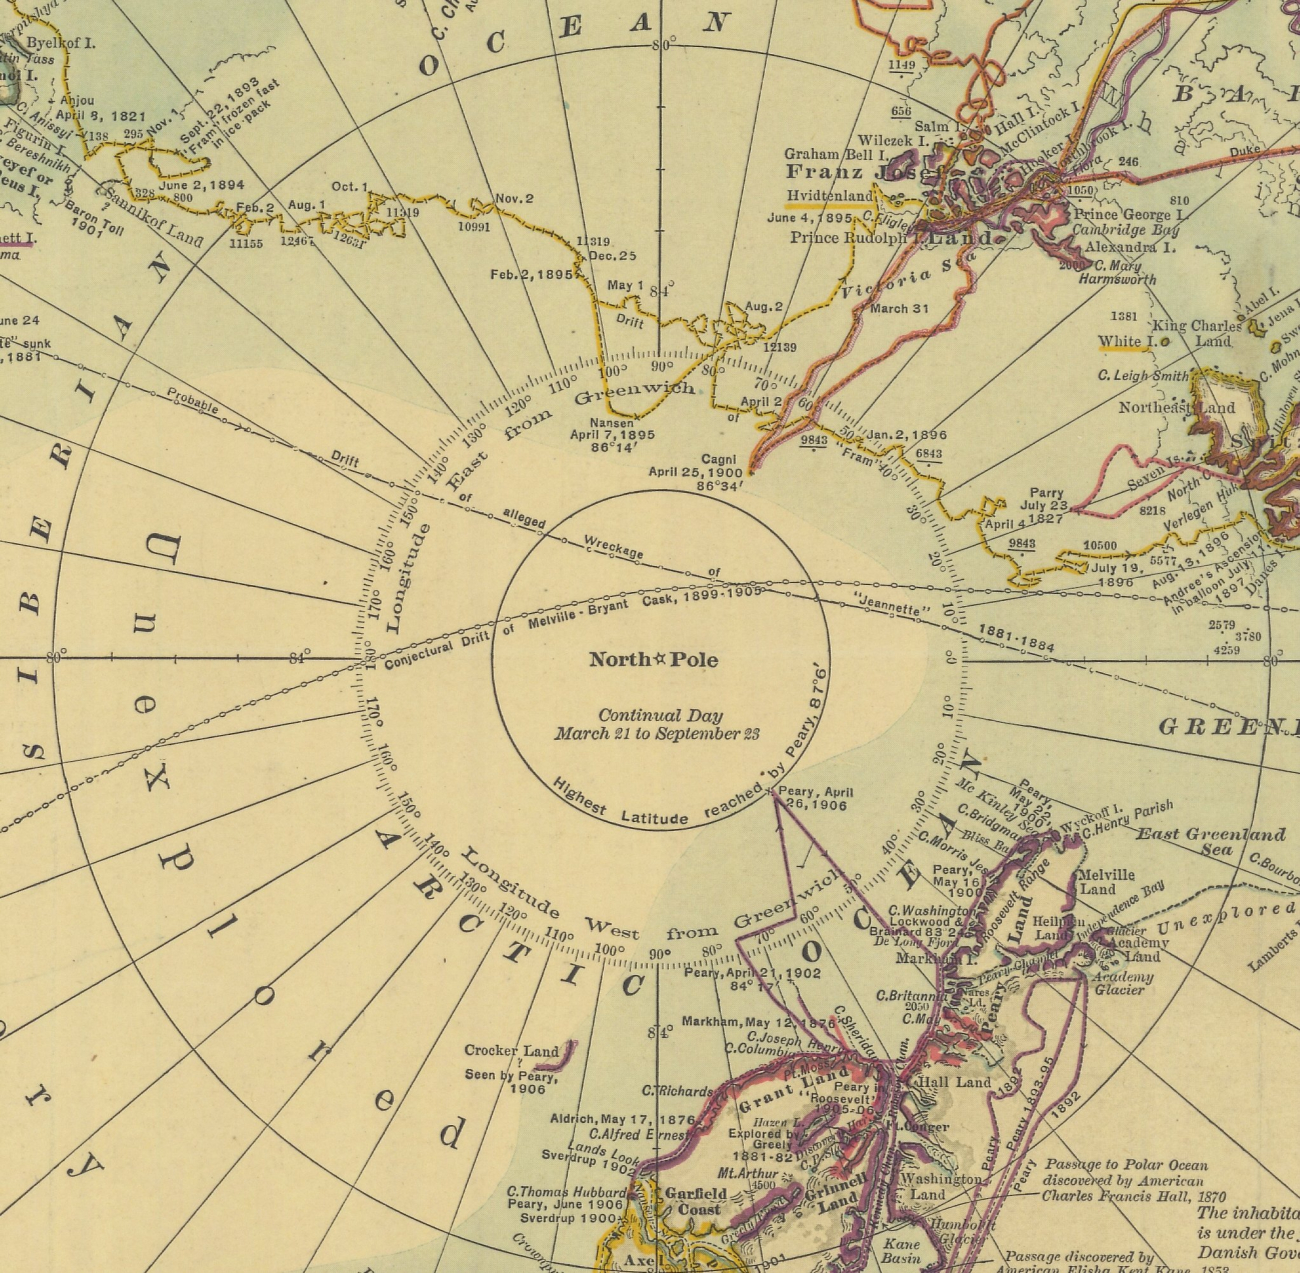 Blowup of North Pole region of The National Geographic Map of the North PoleRegions showing discoveries and routes of explorers up to 1907